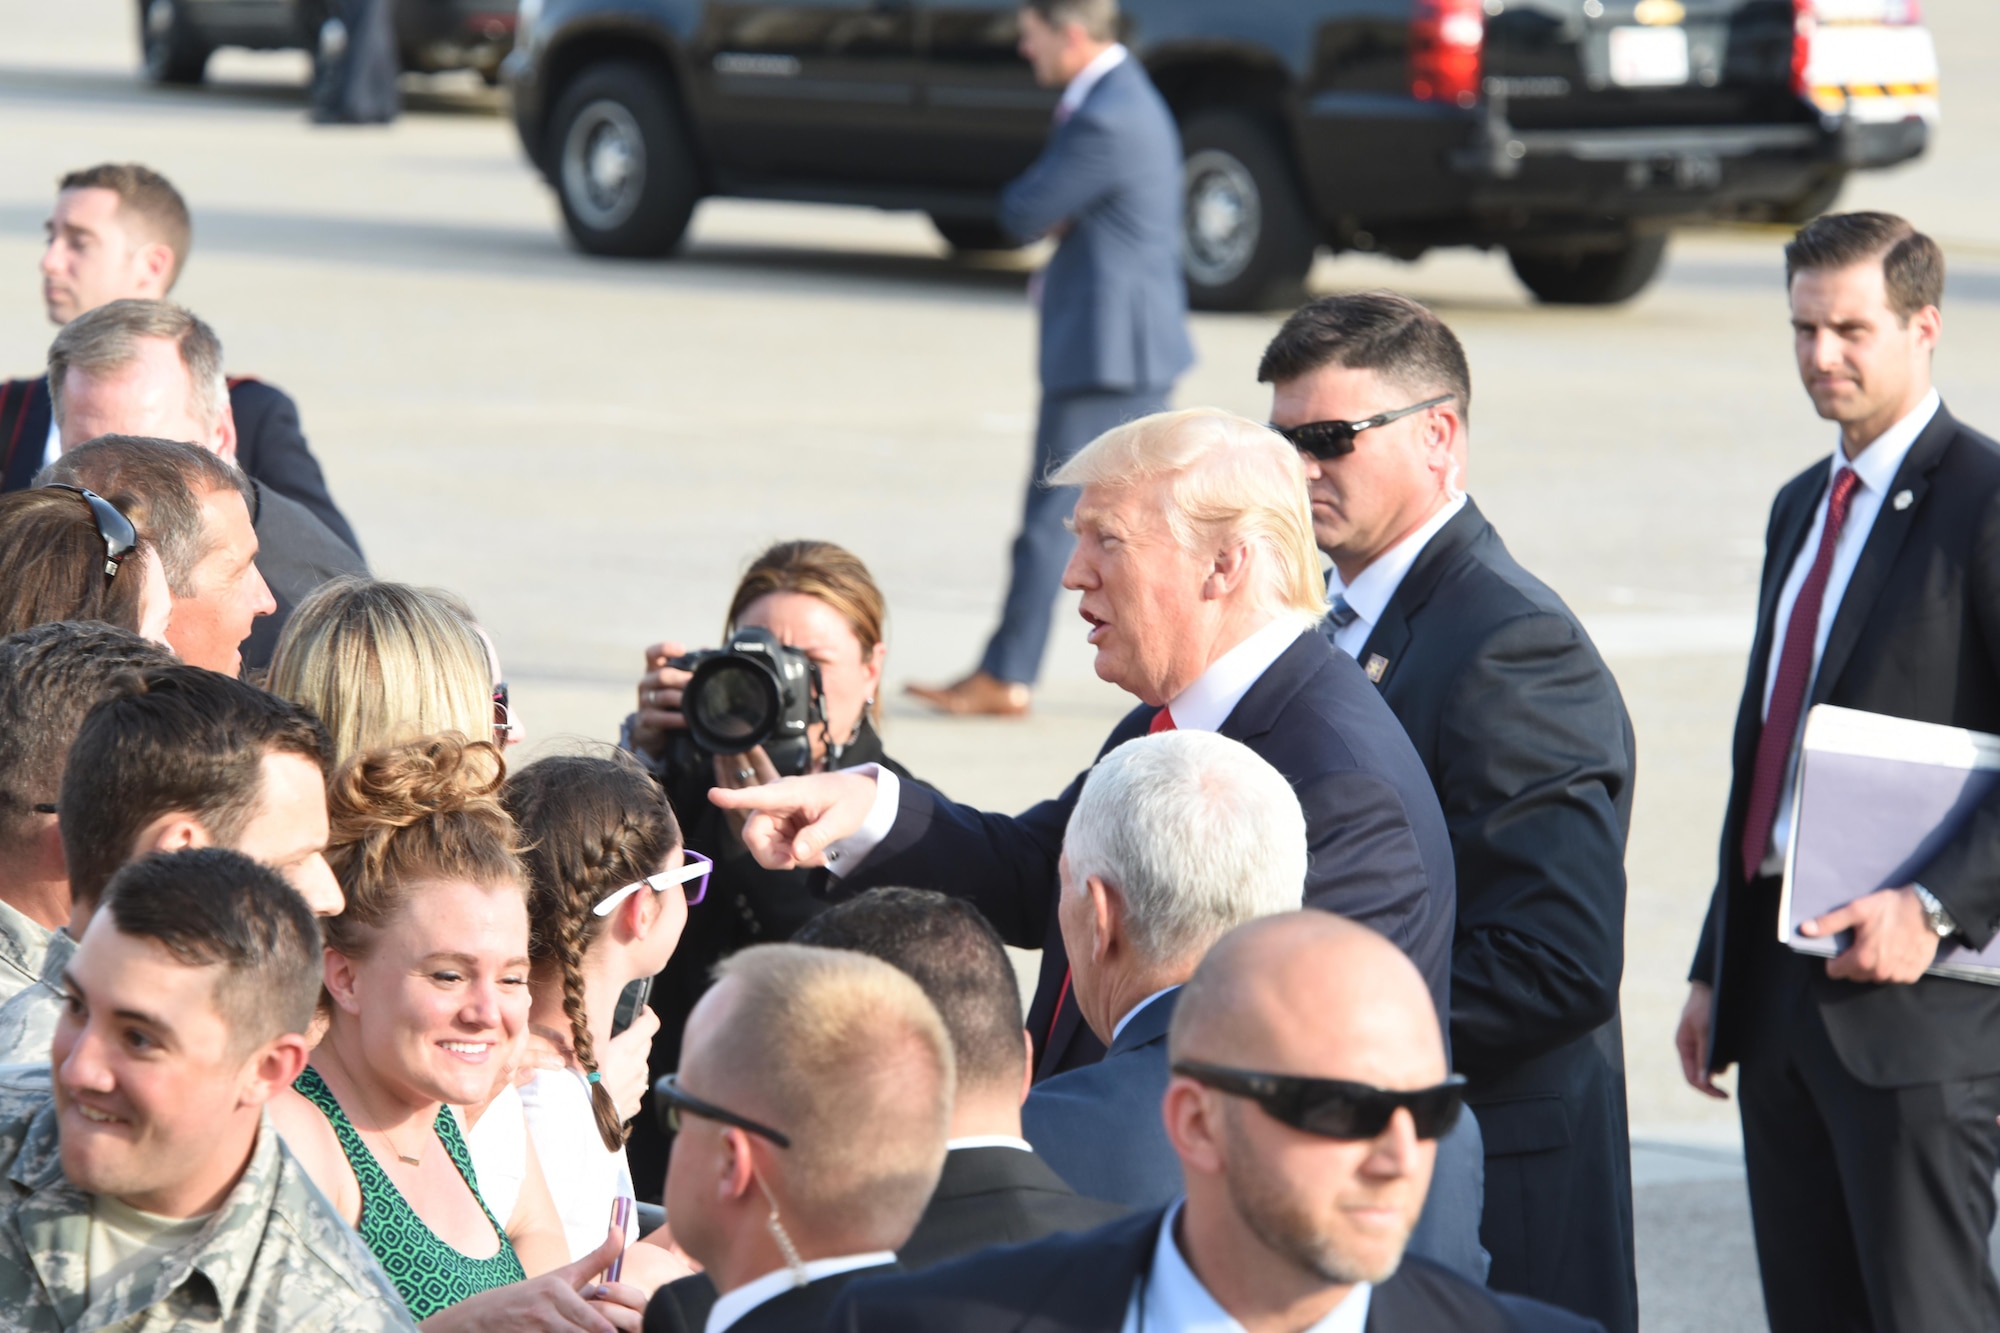 President Donald J. Trump and Vice President Mike Pence shake the hands of 193rd Special Operations Wing Airmen, and Airmen’s family and friends, Middletown, Pennsylvania, April 29, 2017. The President and Vice President landed at the 193rd SOW and were on their way the Harrisburg Farm Show Complex for President Trump’s 100th day rally when they made time to greet those that awaited their arrival. (U.S. Air National Guard Photo by Master Sgt. Culeen Shaffer/Released)